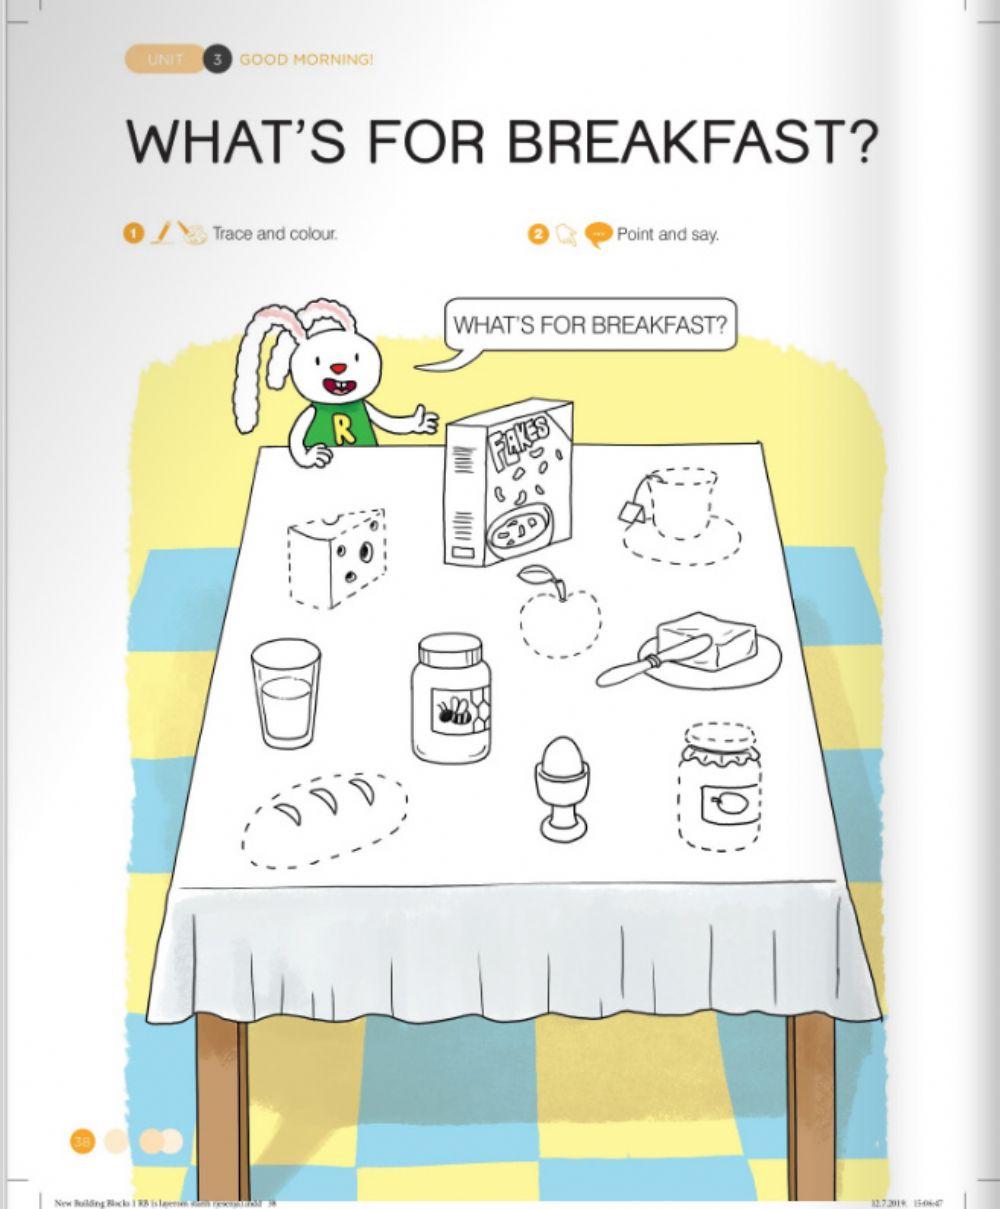 Unit 3: Lesson 2:What's for breakfest?